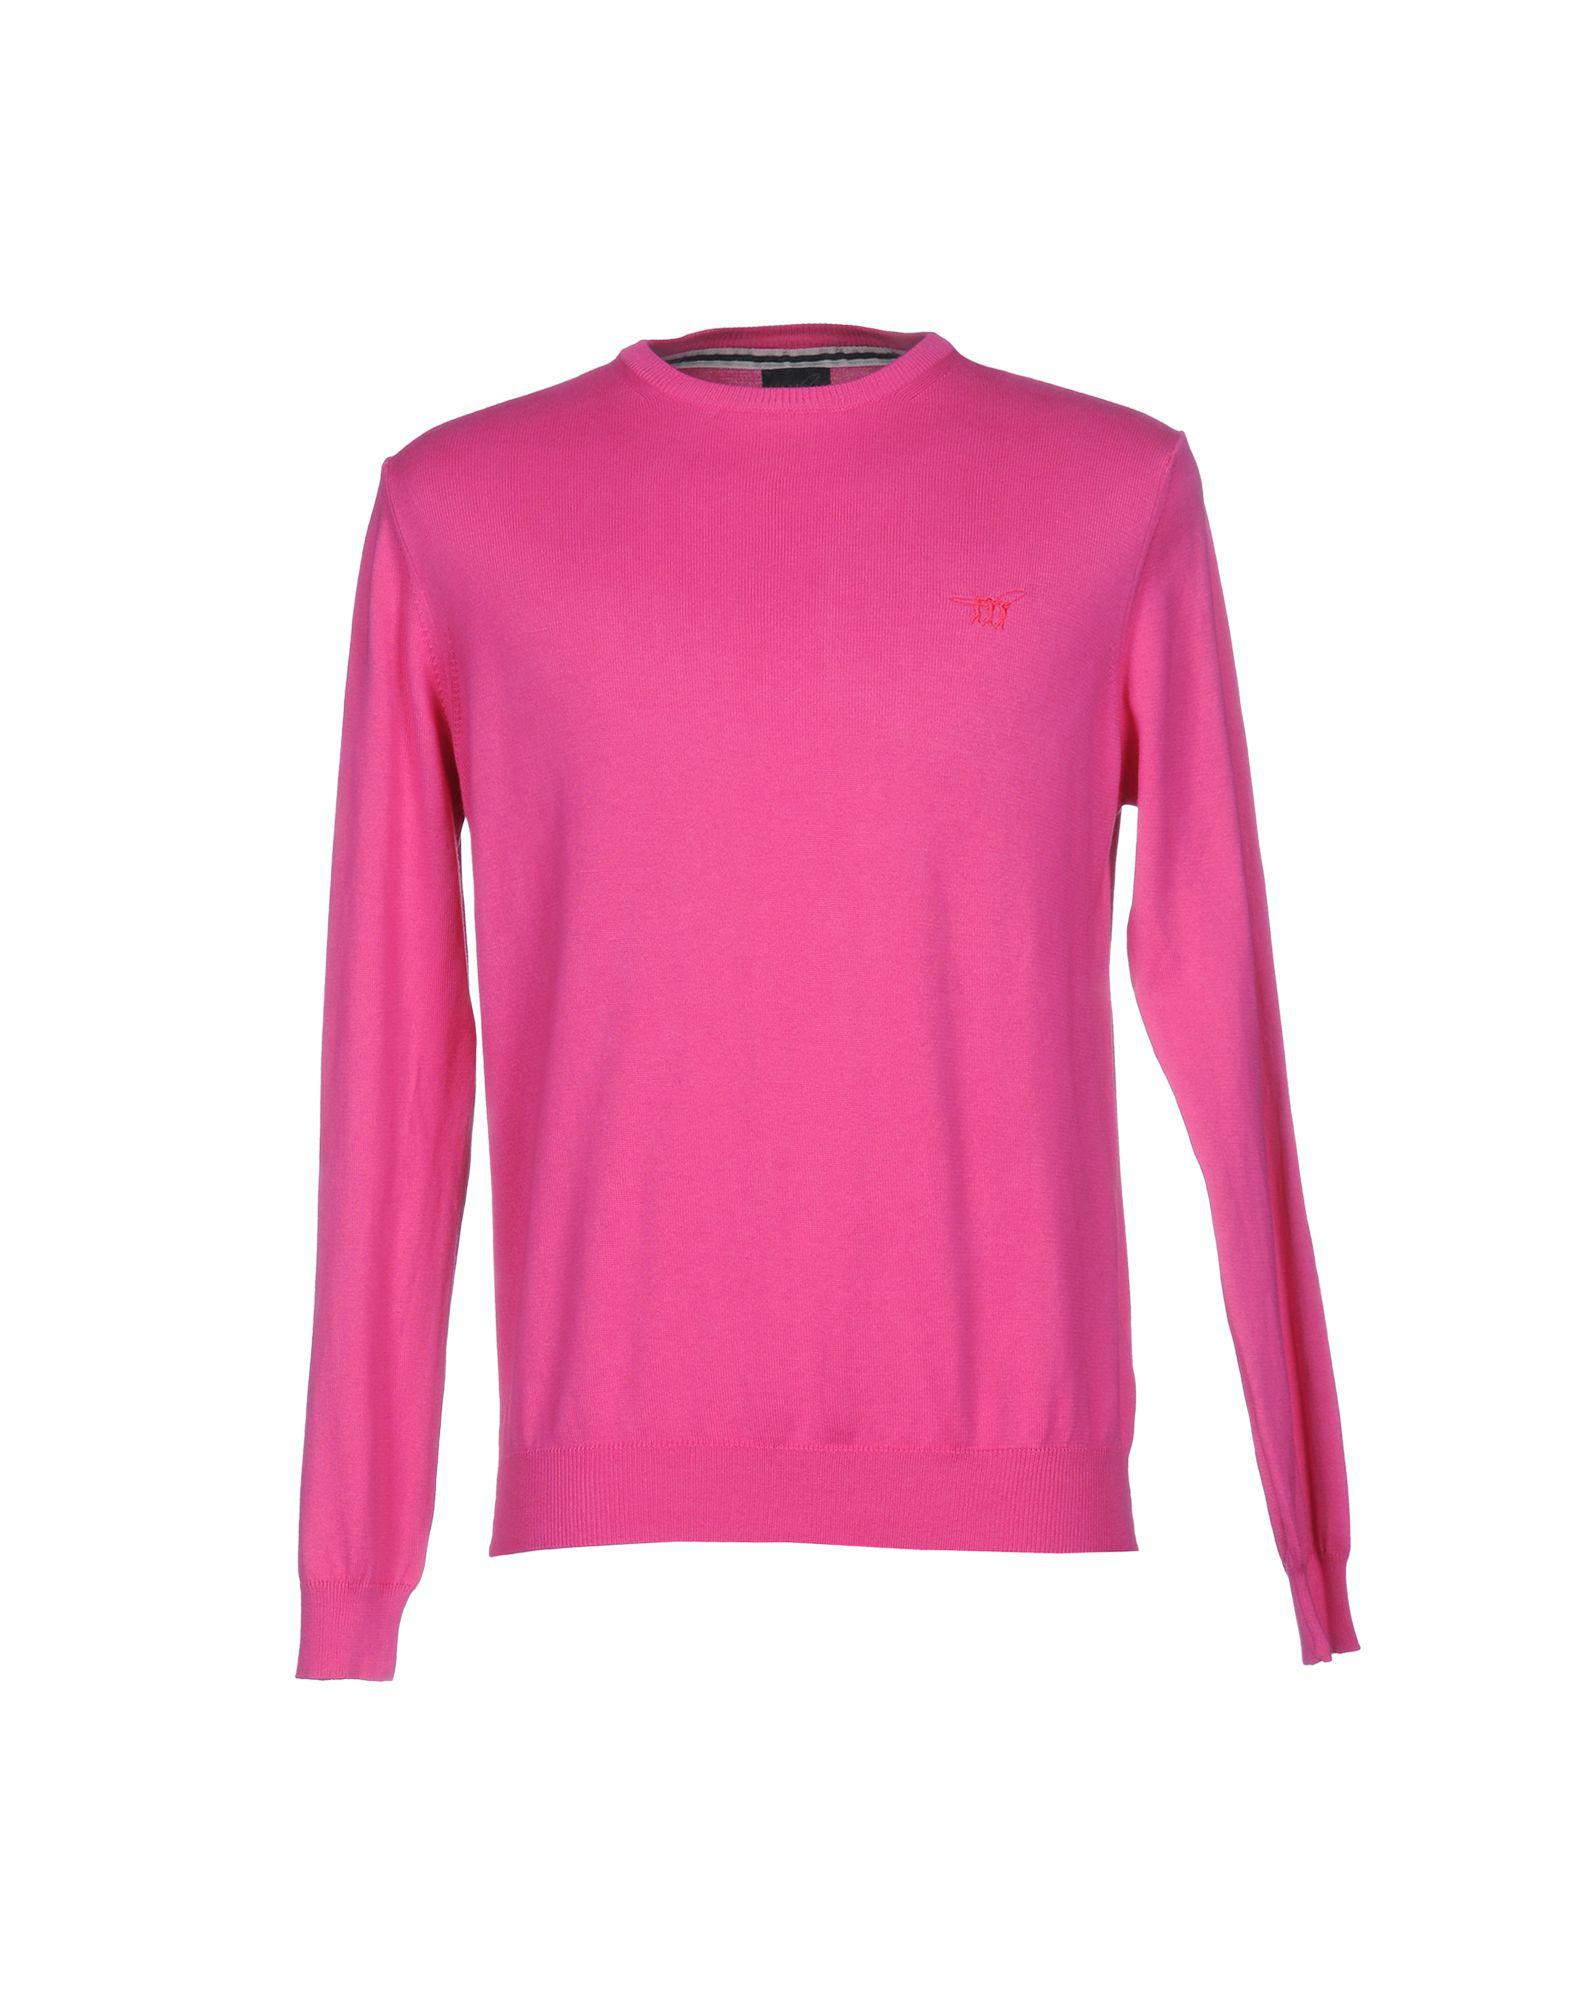 Henry Cotton's Cotton Jumper in Fuchsia (Pink) for Men - Lyst